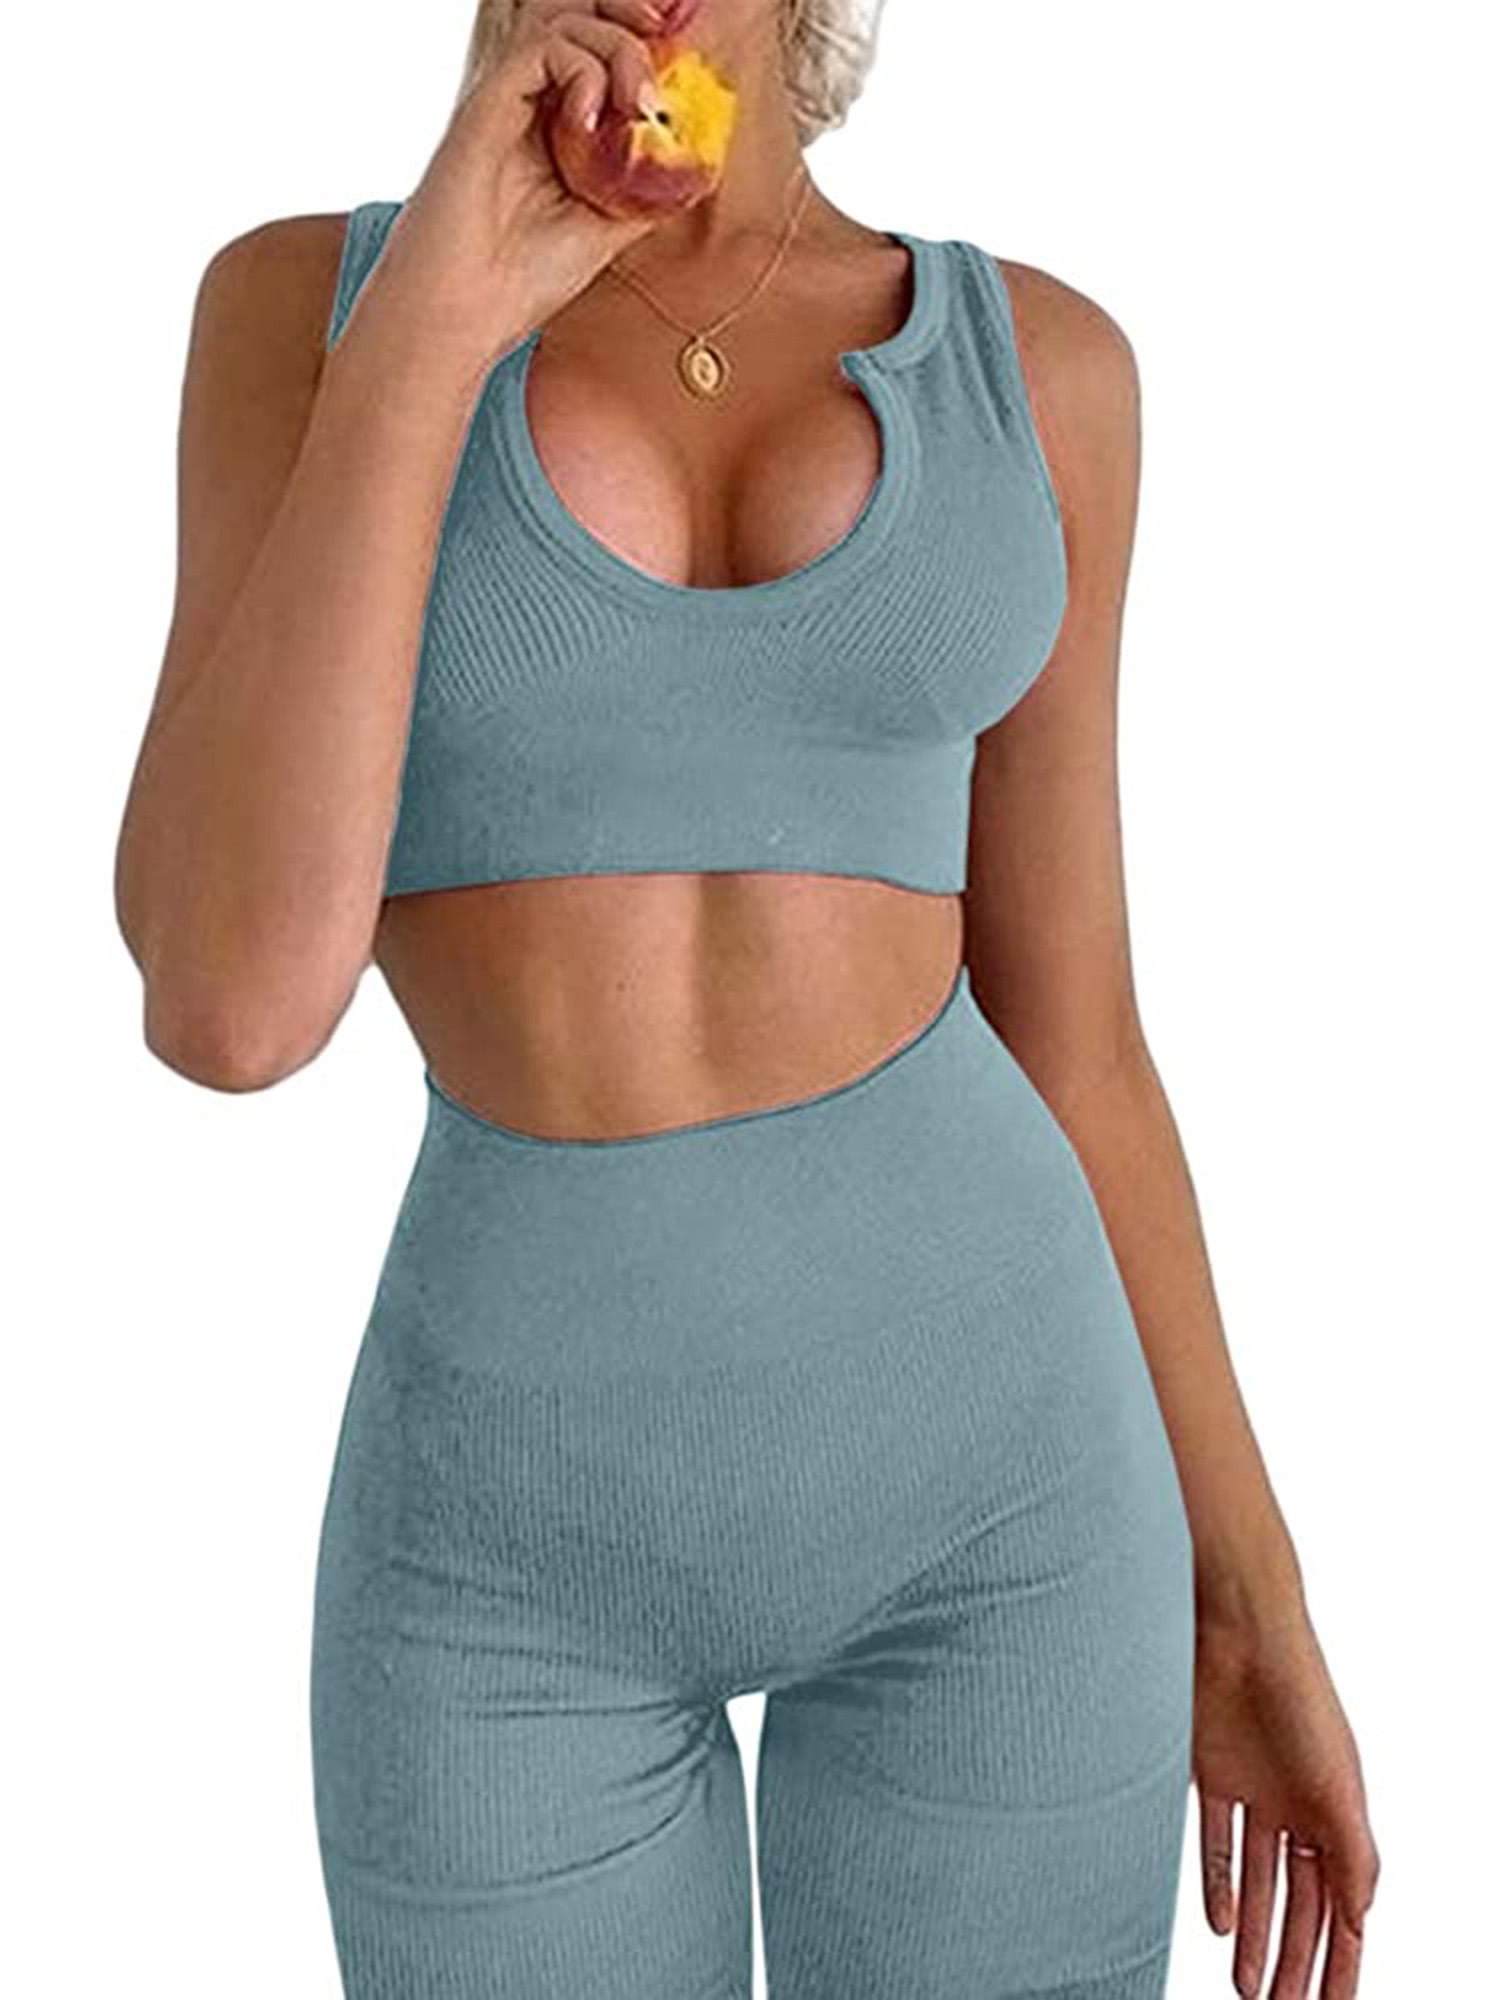 Ribbed Workout Sets for Women 2 Piece Gym Outfits Crop Tops High Waist Running Shorts Yoga Activewear 